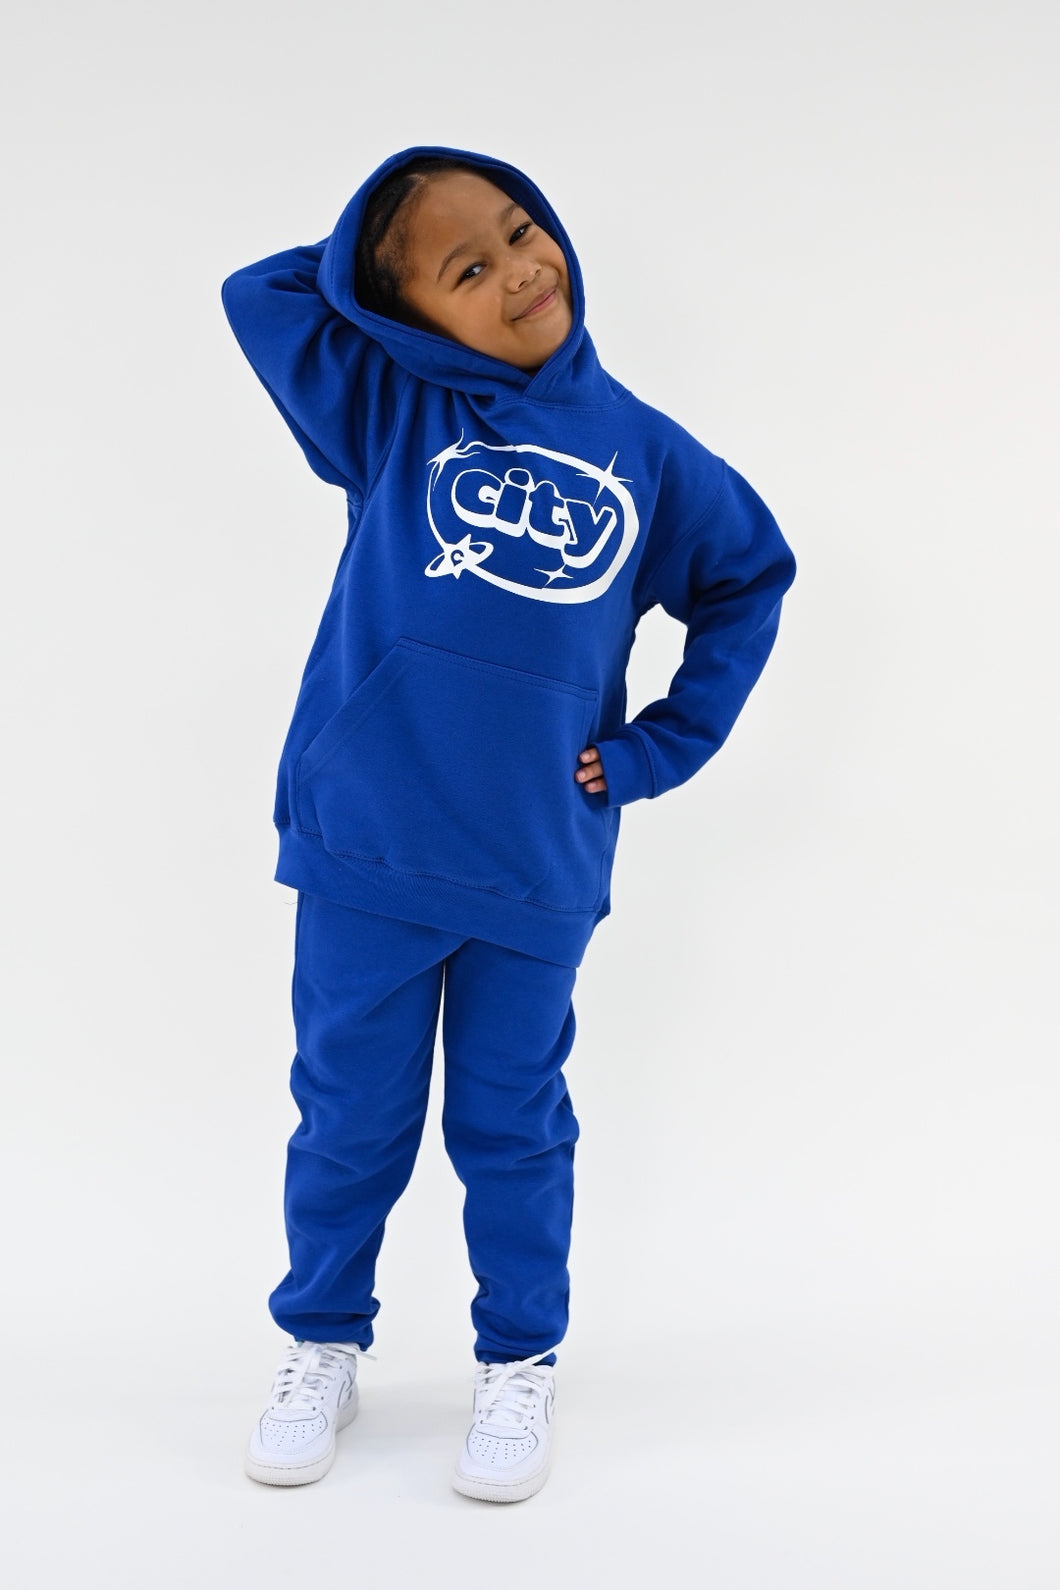 Youth Sweat Suit (Blue) on